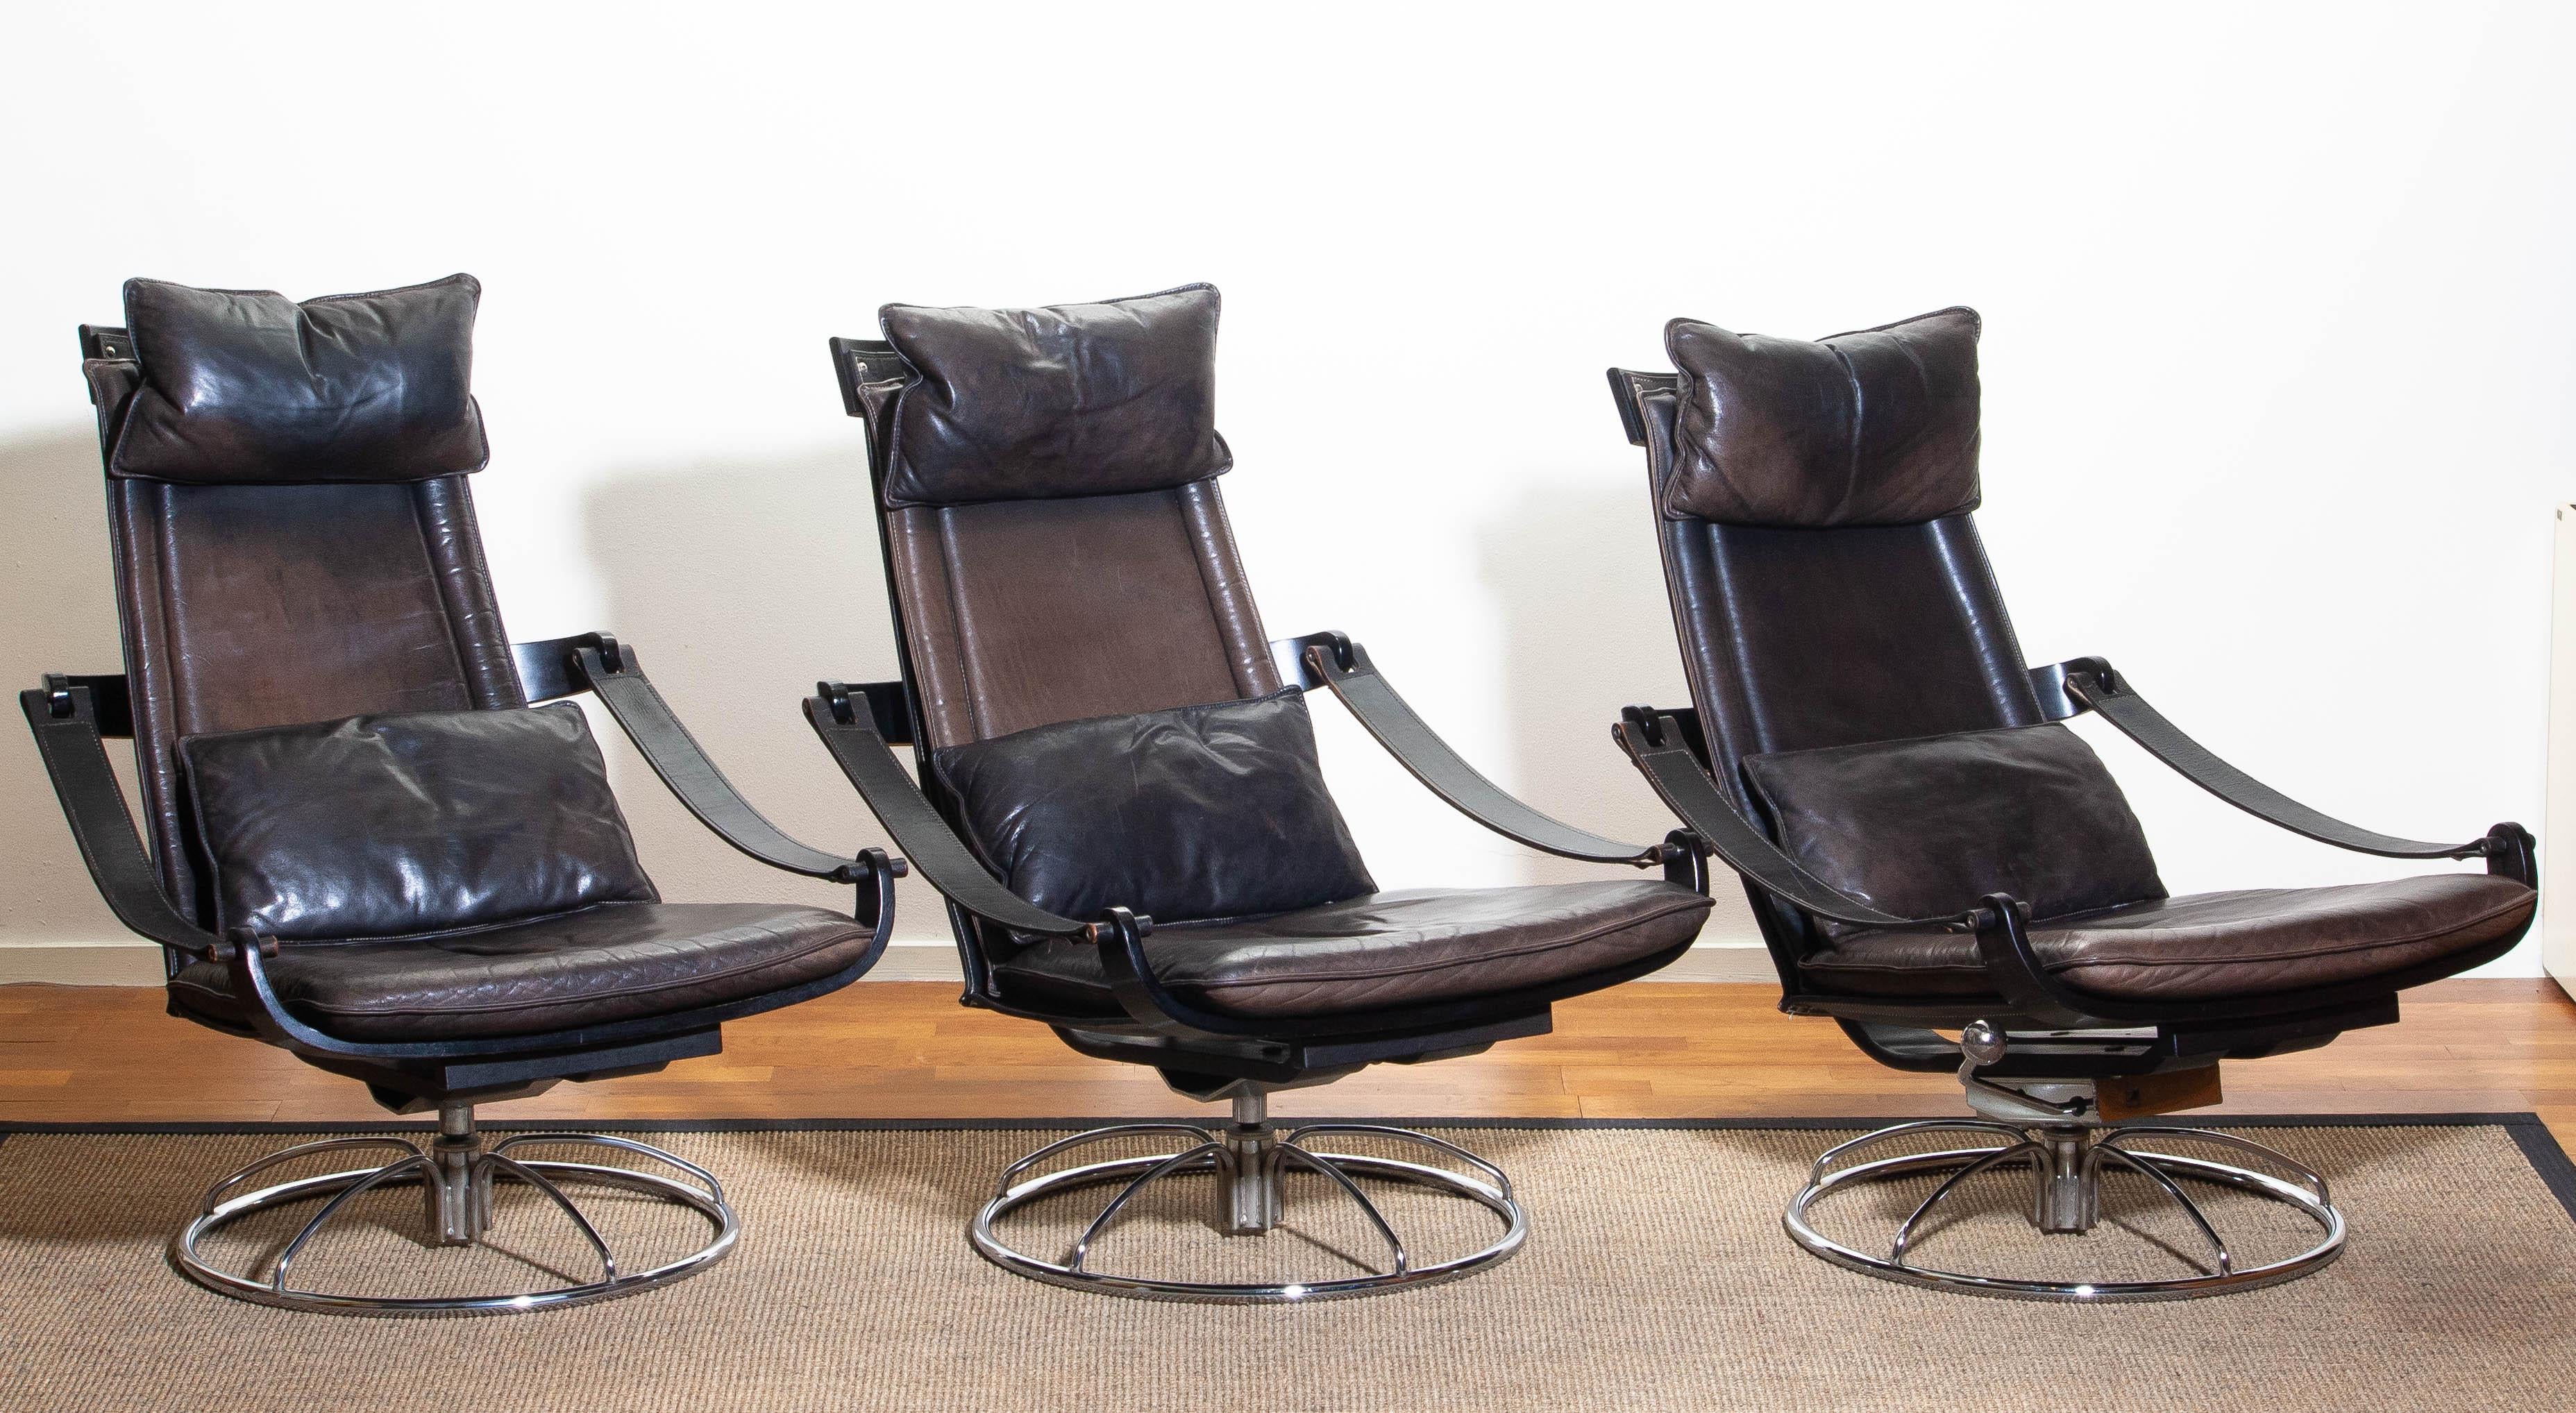 Scandinavian Modern 1970s, Three Leather Swivel / Relax Chairs By Ake Fribytter For Nelo, Sweden